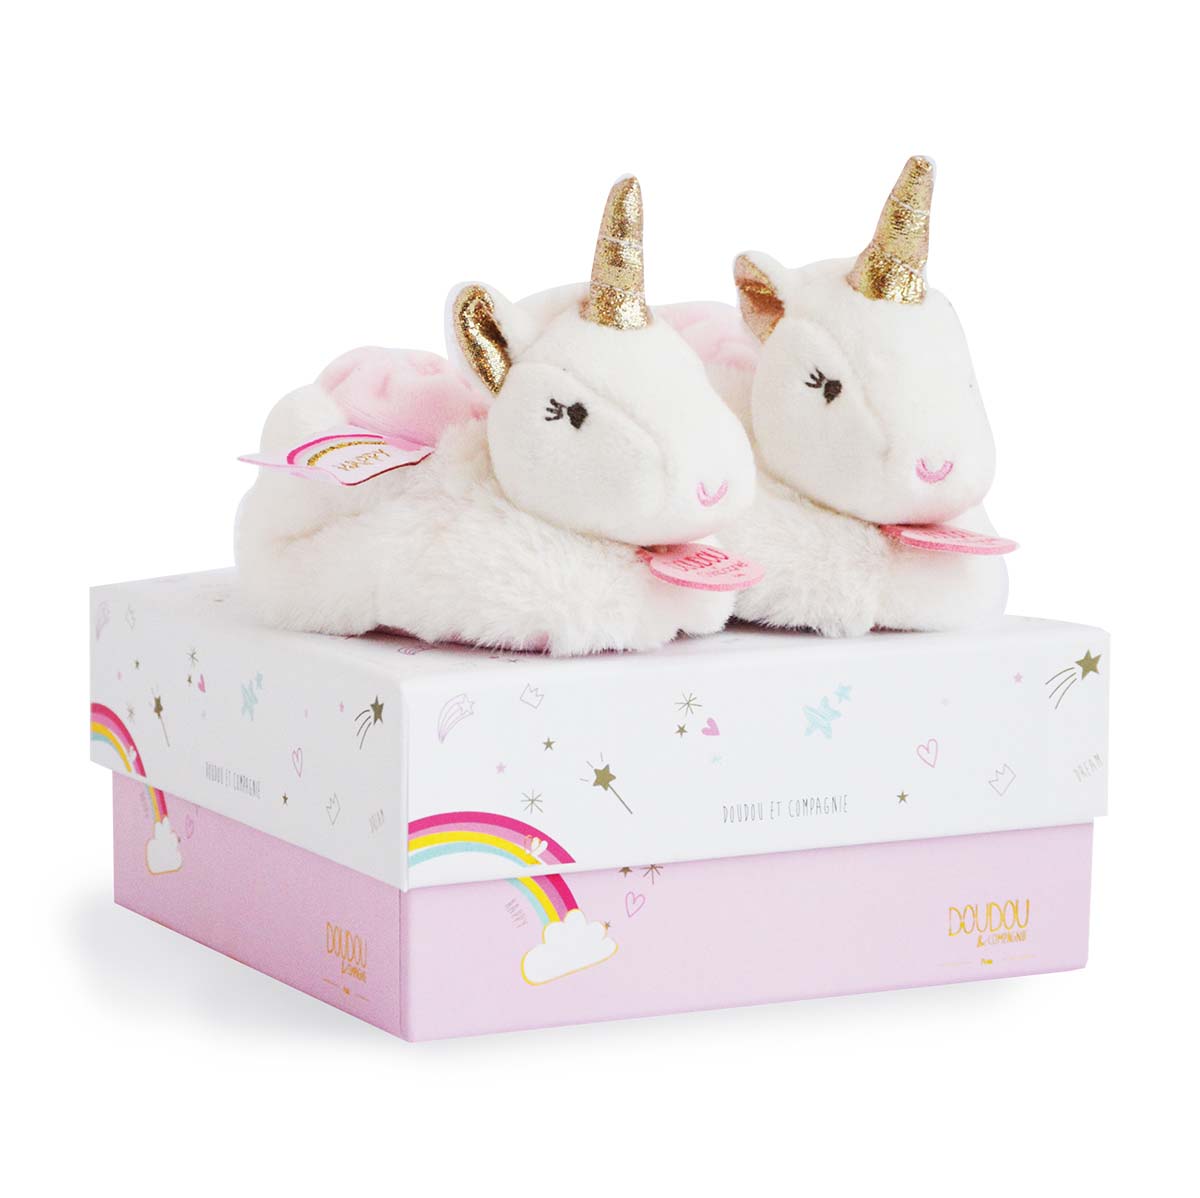 Doudou et Compagnie Lucie the Unicorn - Booties With Rattle Rattles